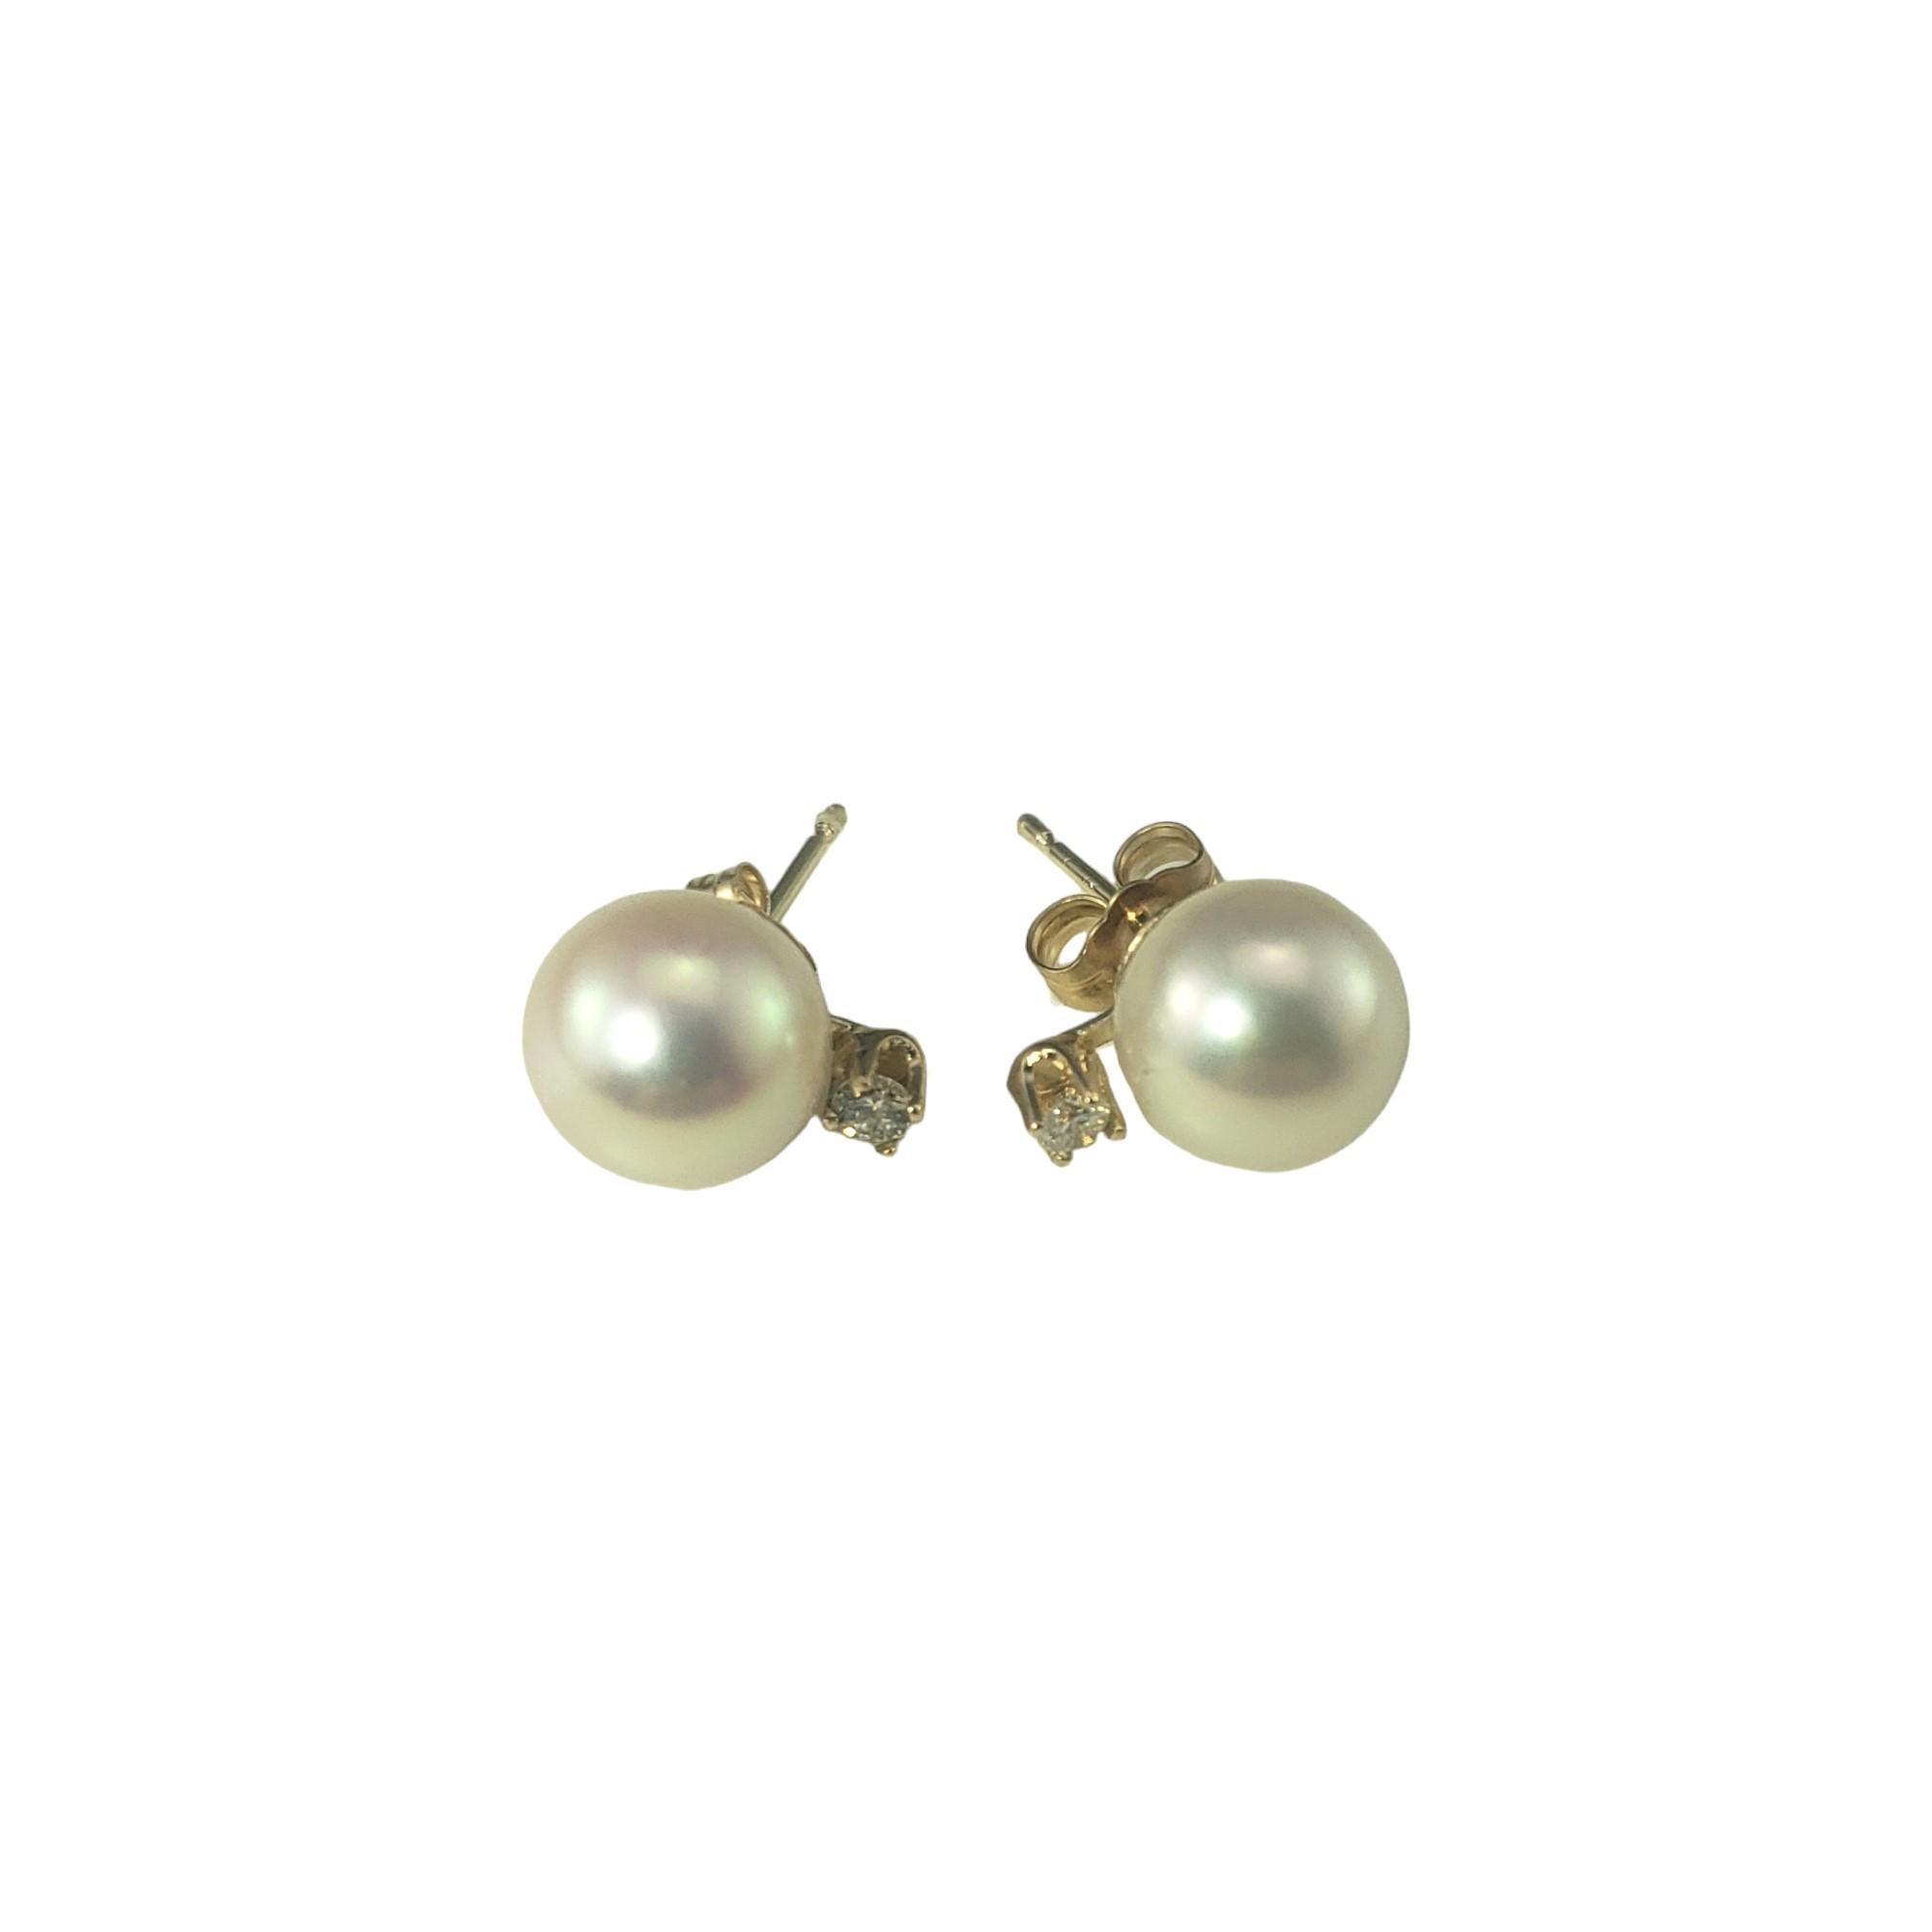 Vintage 14 Karat Yellow Gold Pearl and Diamond Earrings-

These elegant earrings each feature one round pearl (8 mm) and one round brilliant cut diamond set in classic 14K yellow gold.  Push back closures.

Approximate total diamond weight: .08